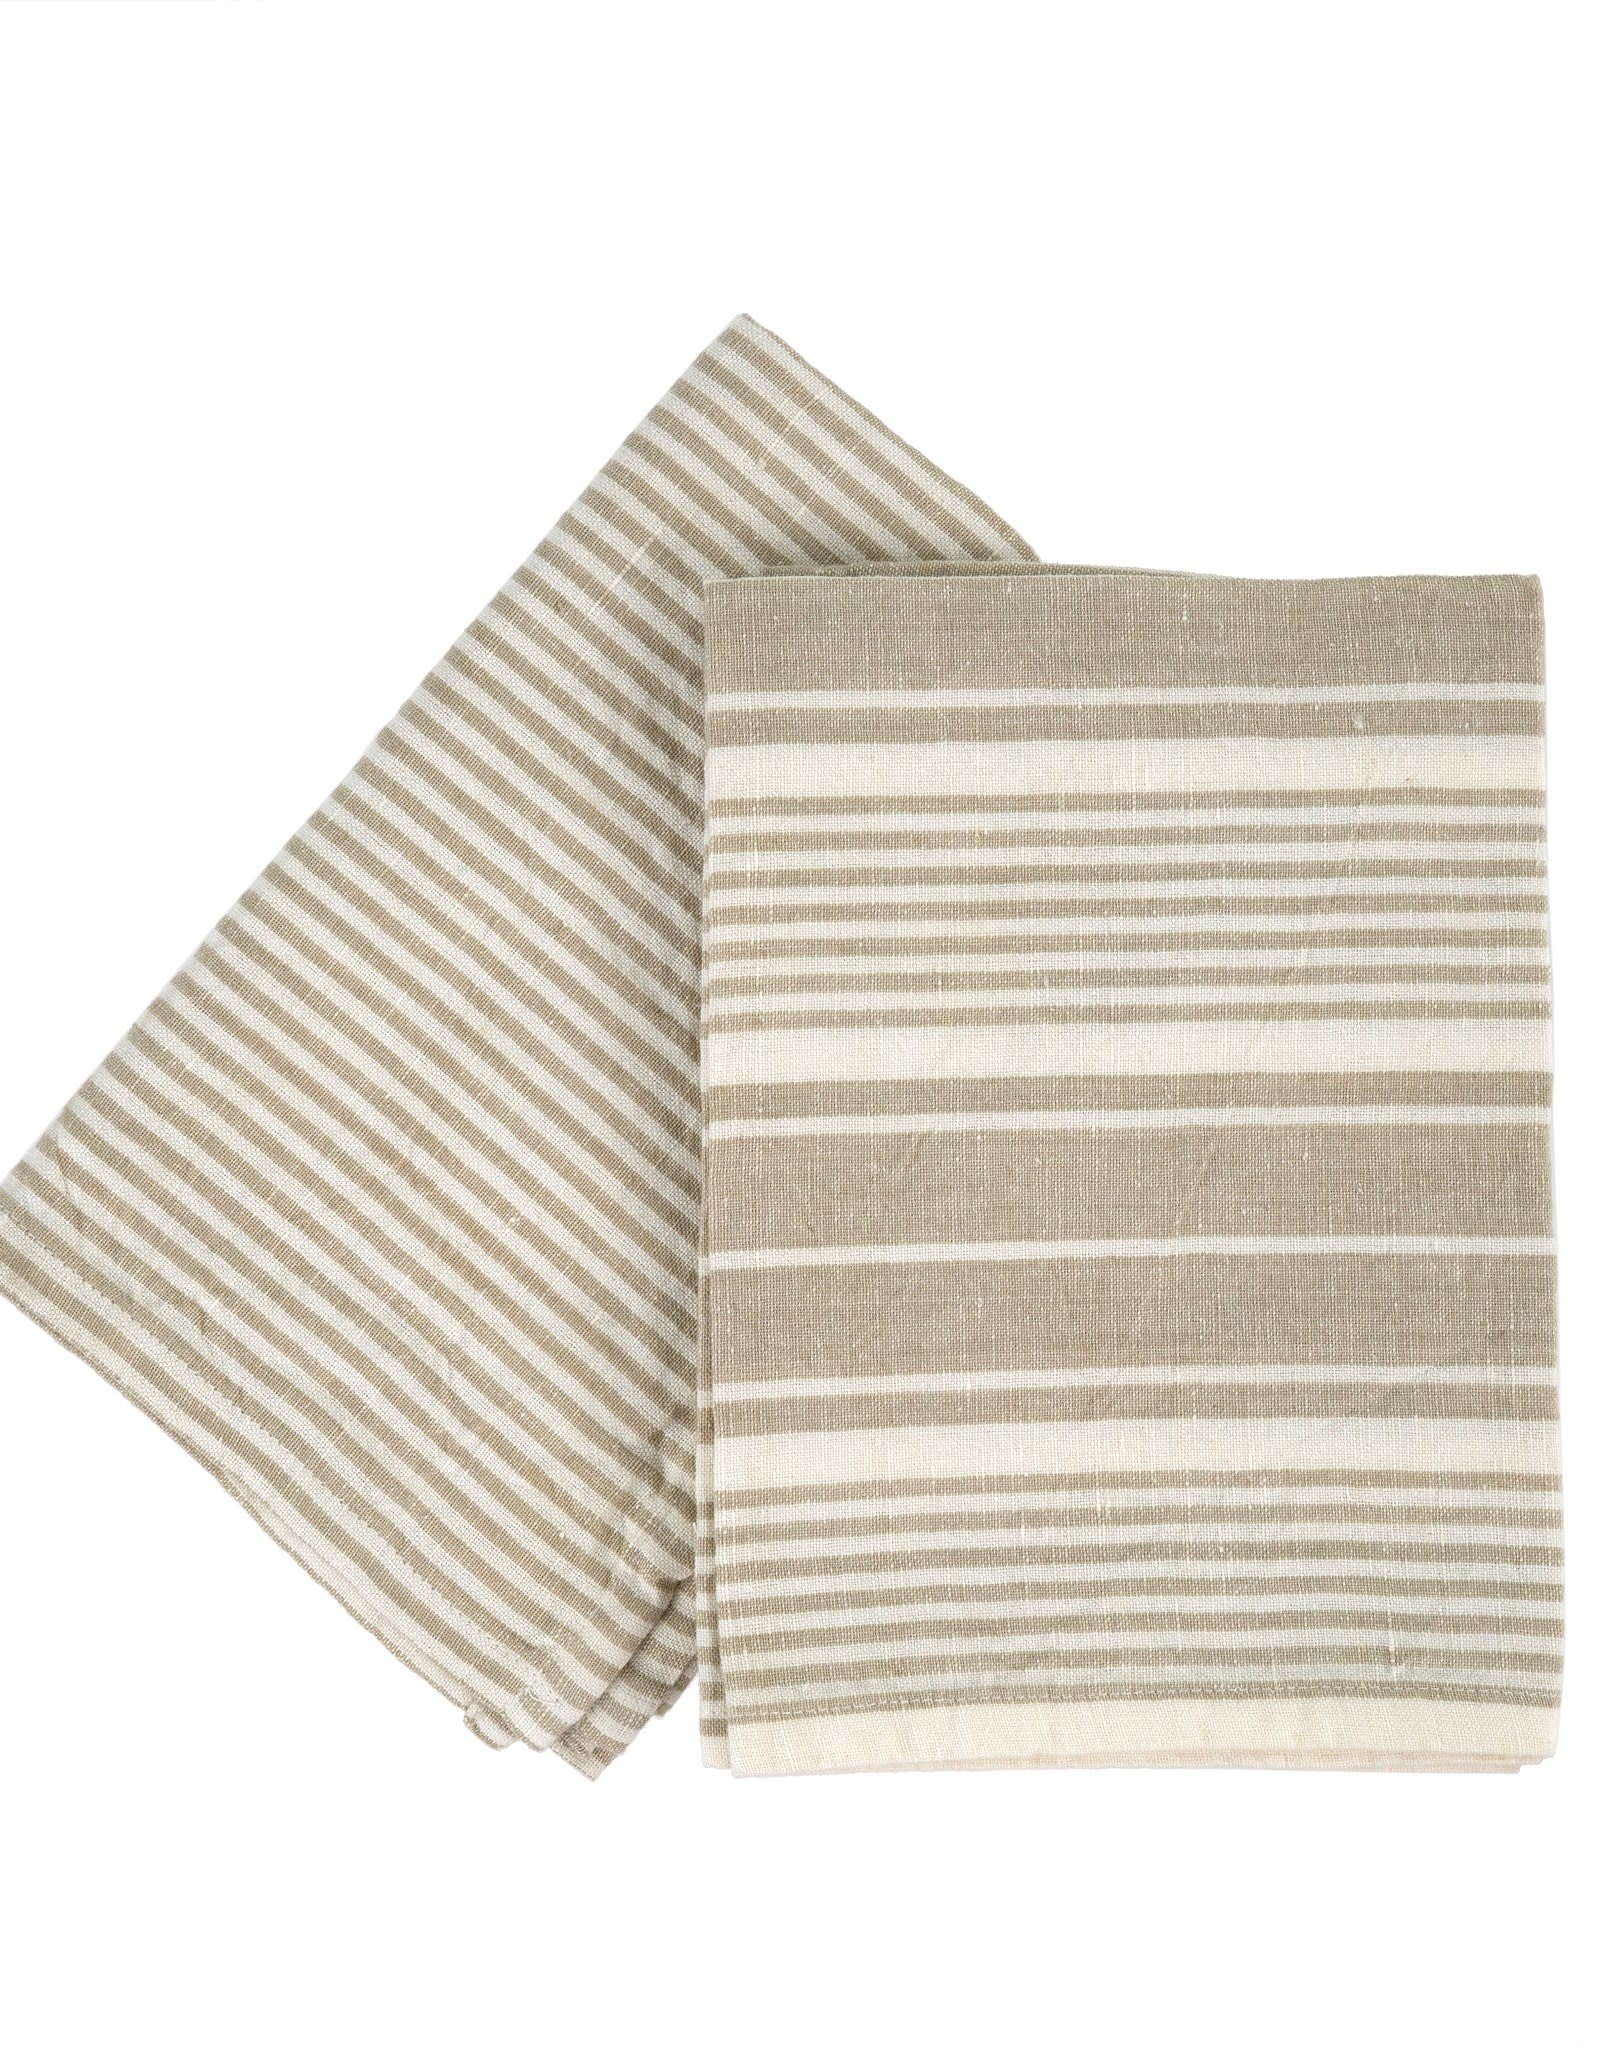 French Linen Tea Towel S/2 - Taupe